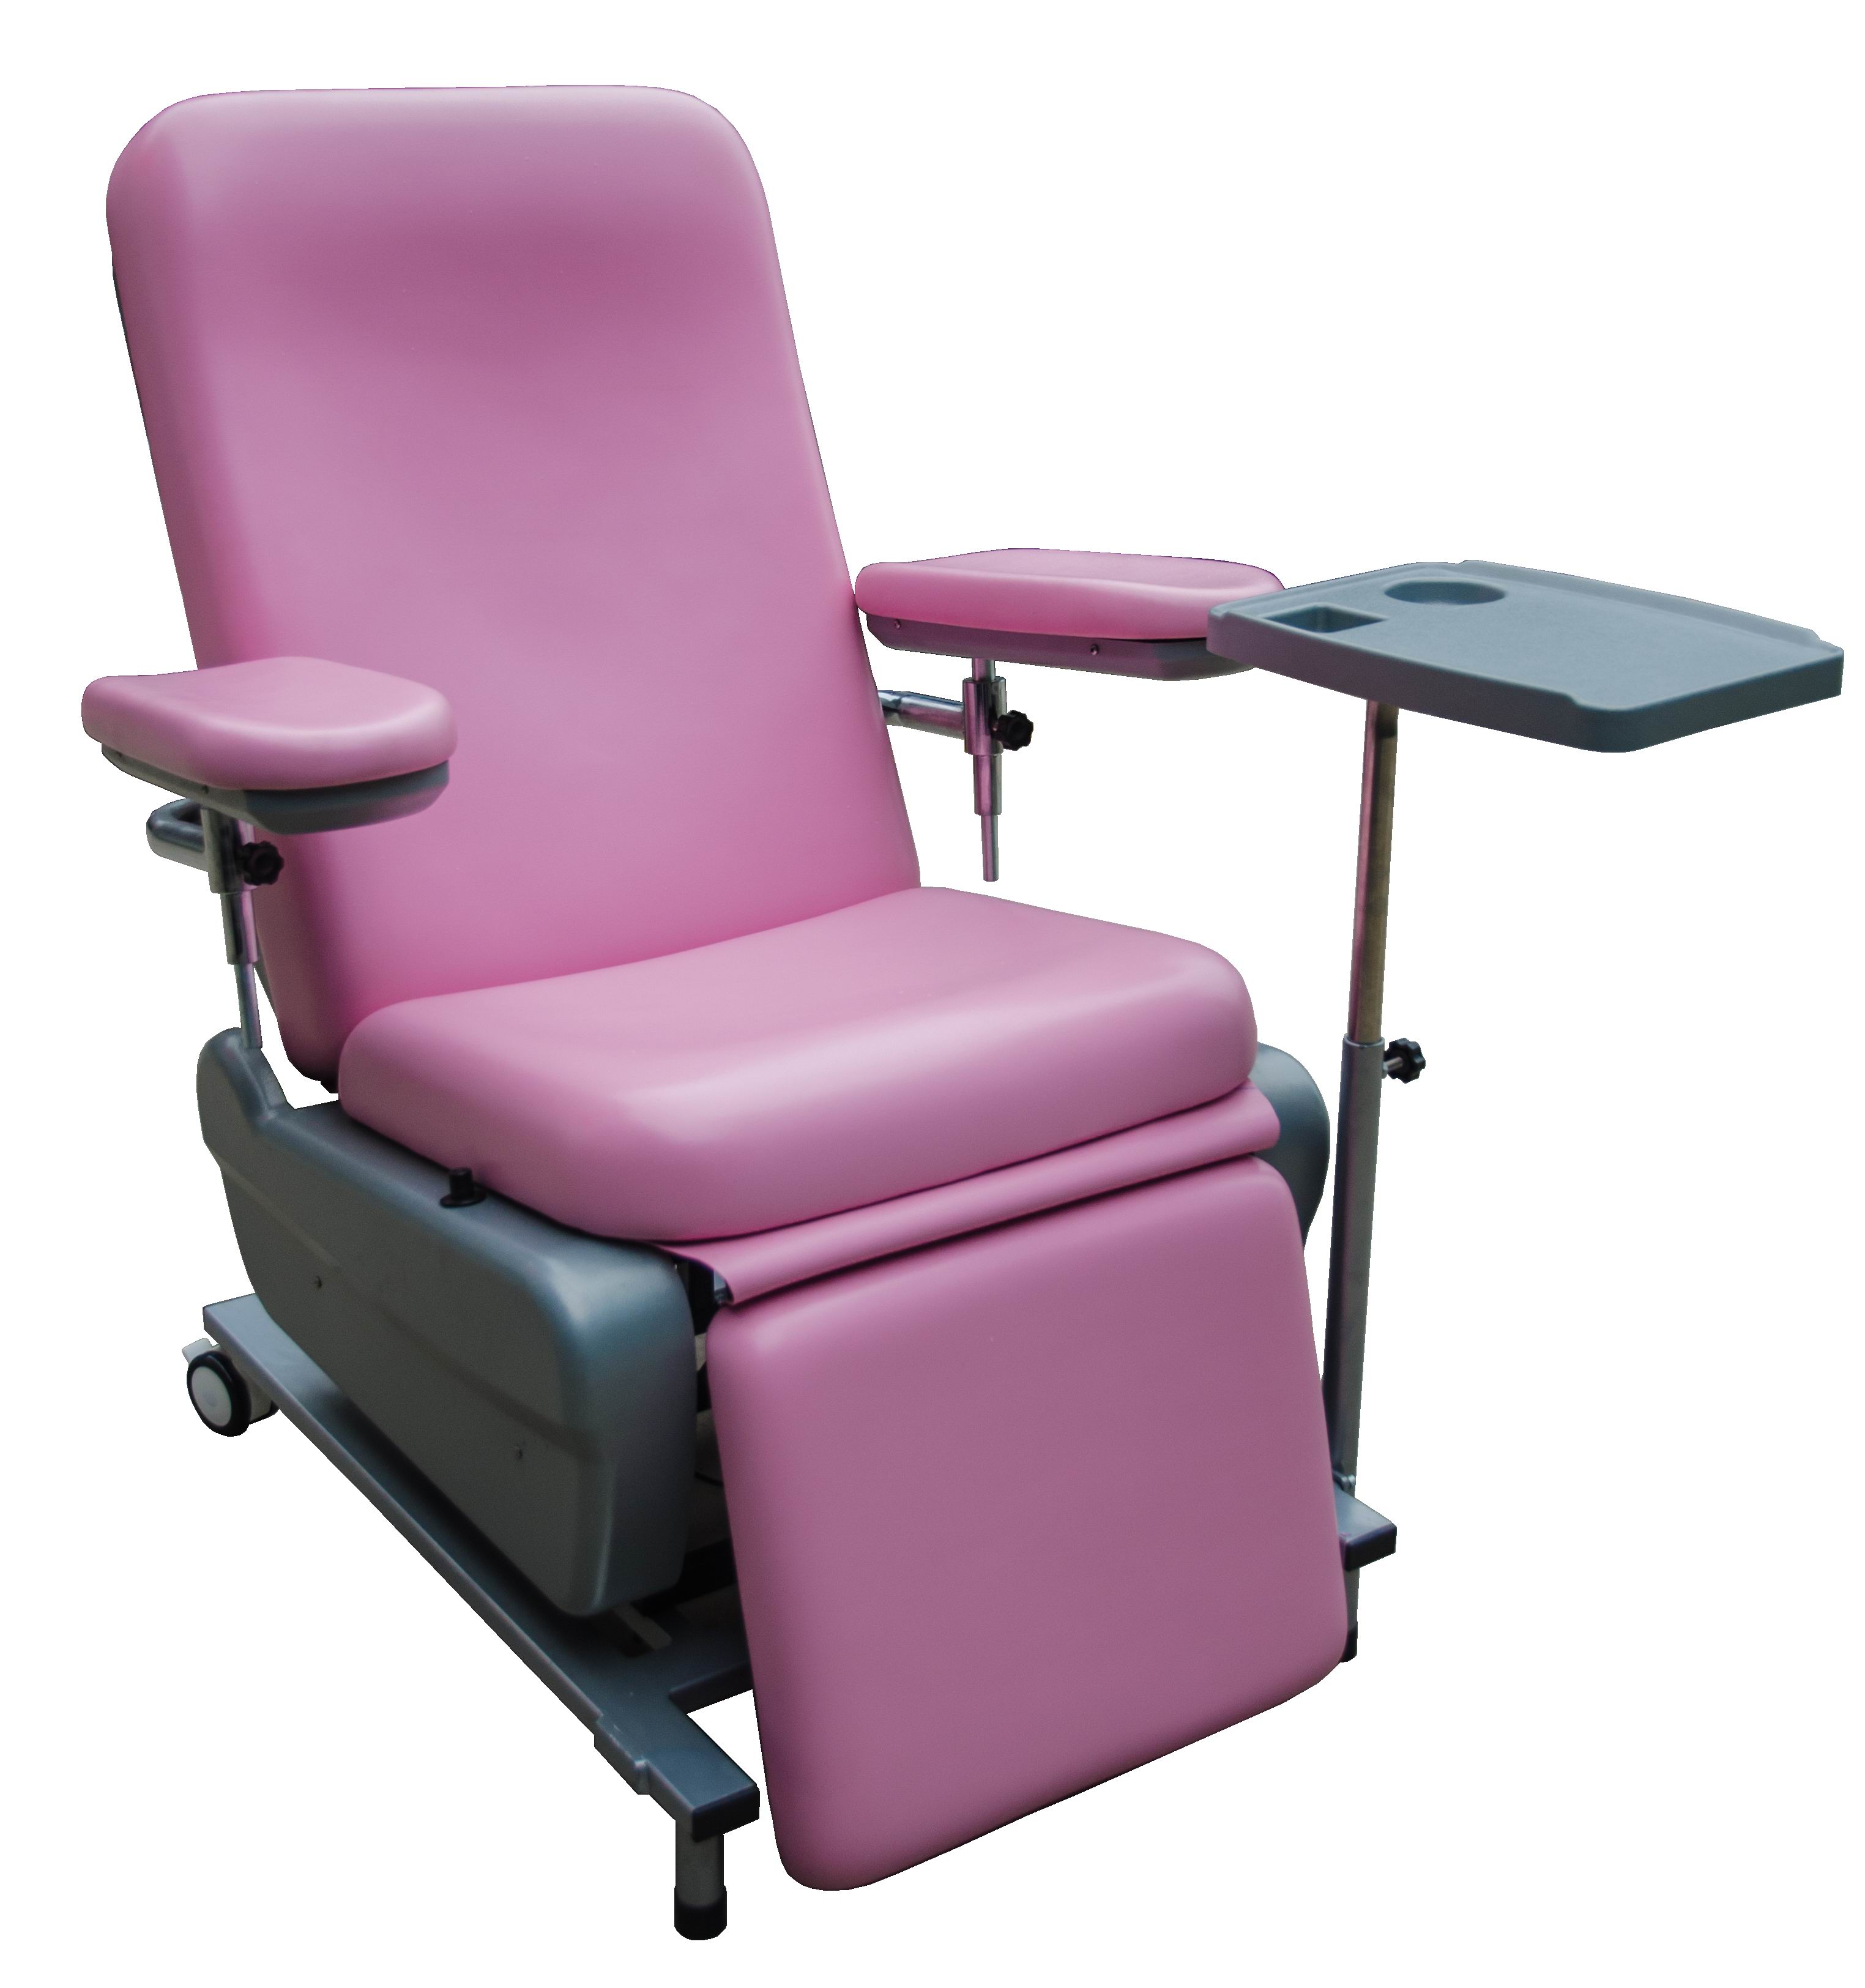 Manual blood donation chair